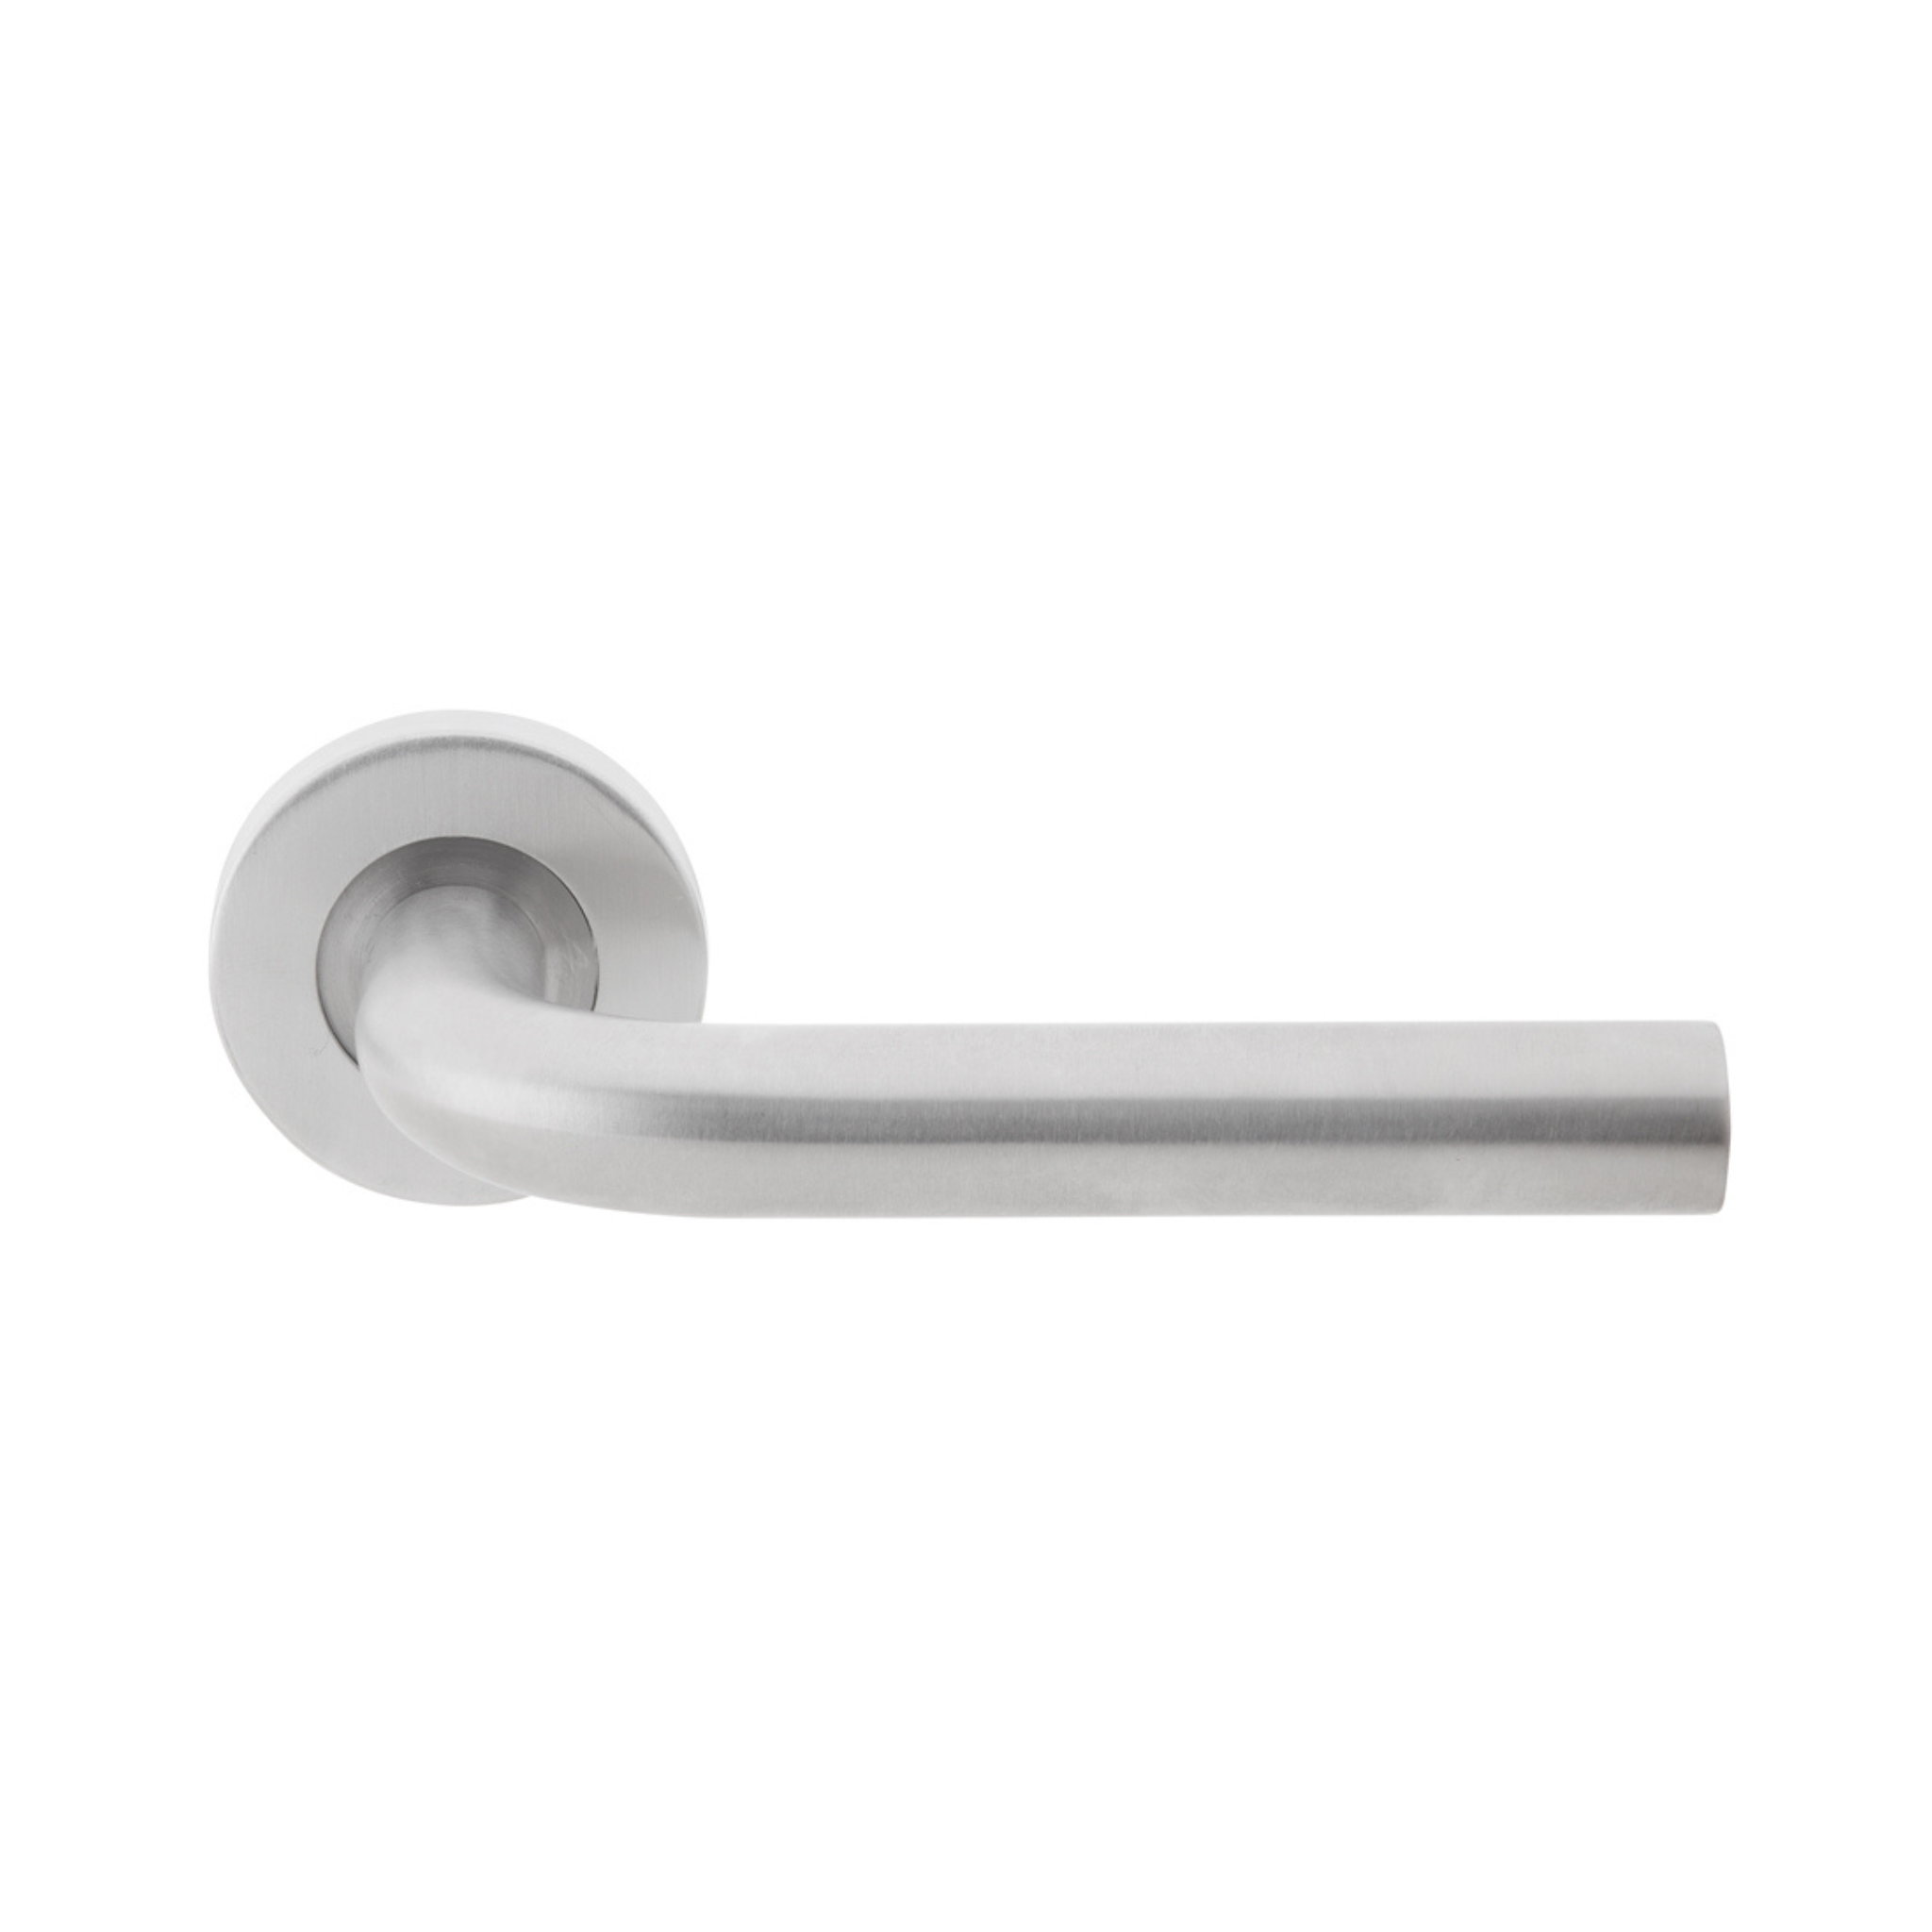 TH 126, Lever Handles, Tubular, On Round Rose, With Escutcheons, 148mm (l), Stainless Steel, DORMAKABA